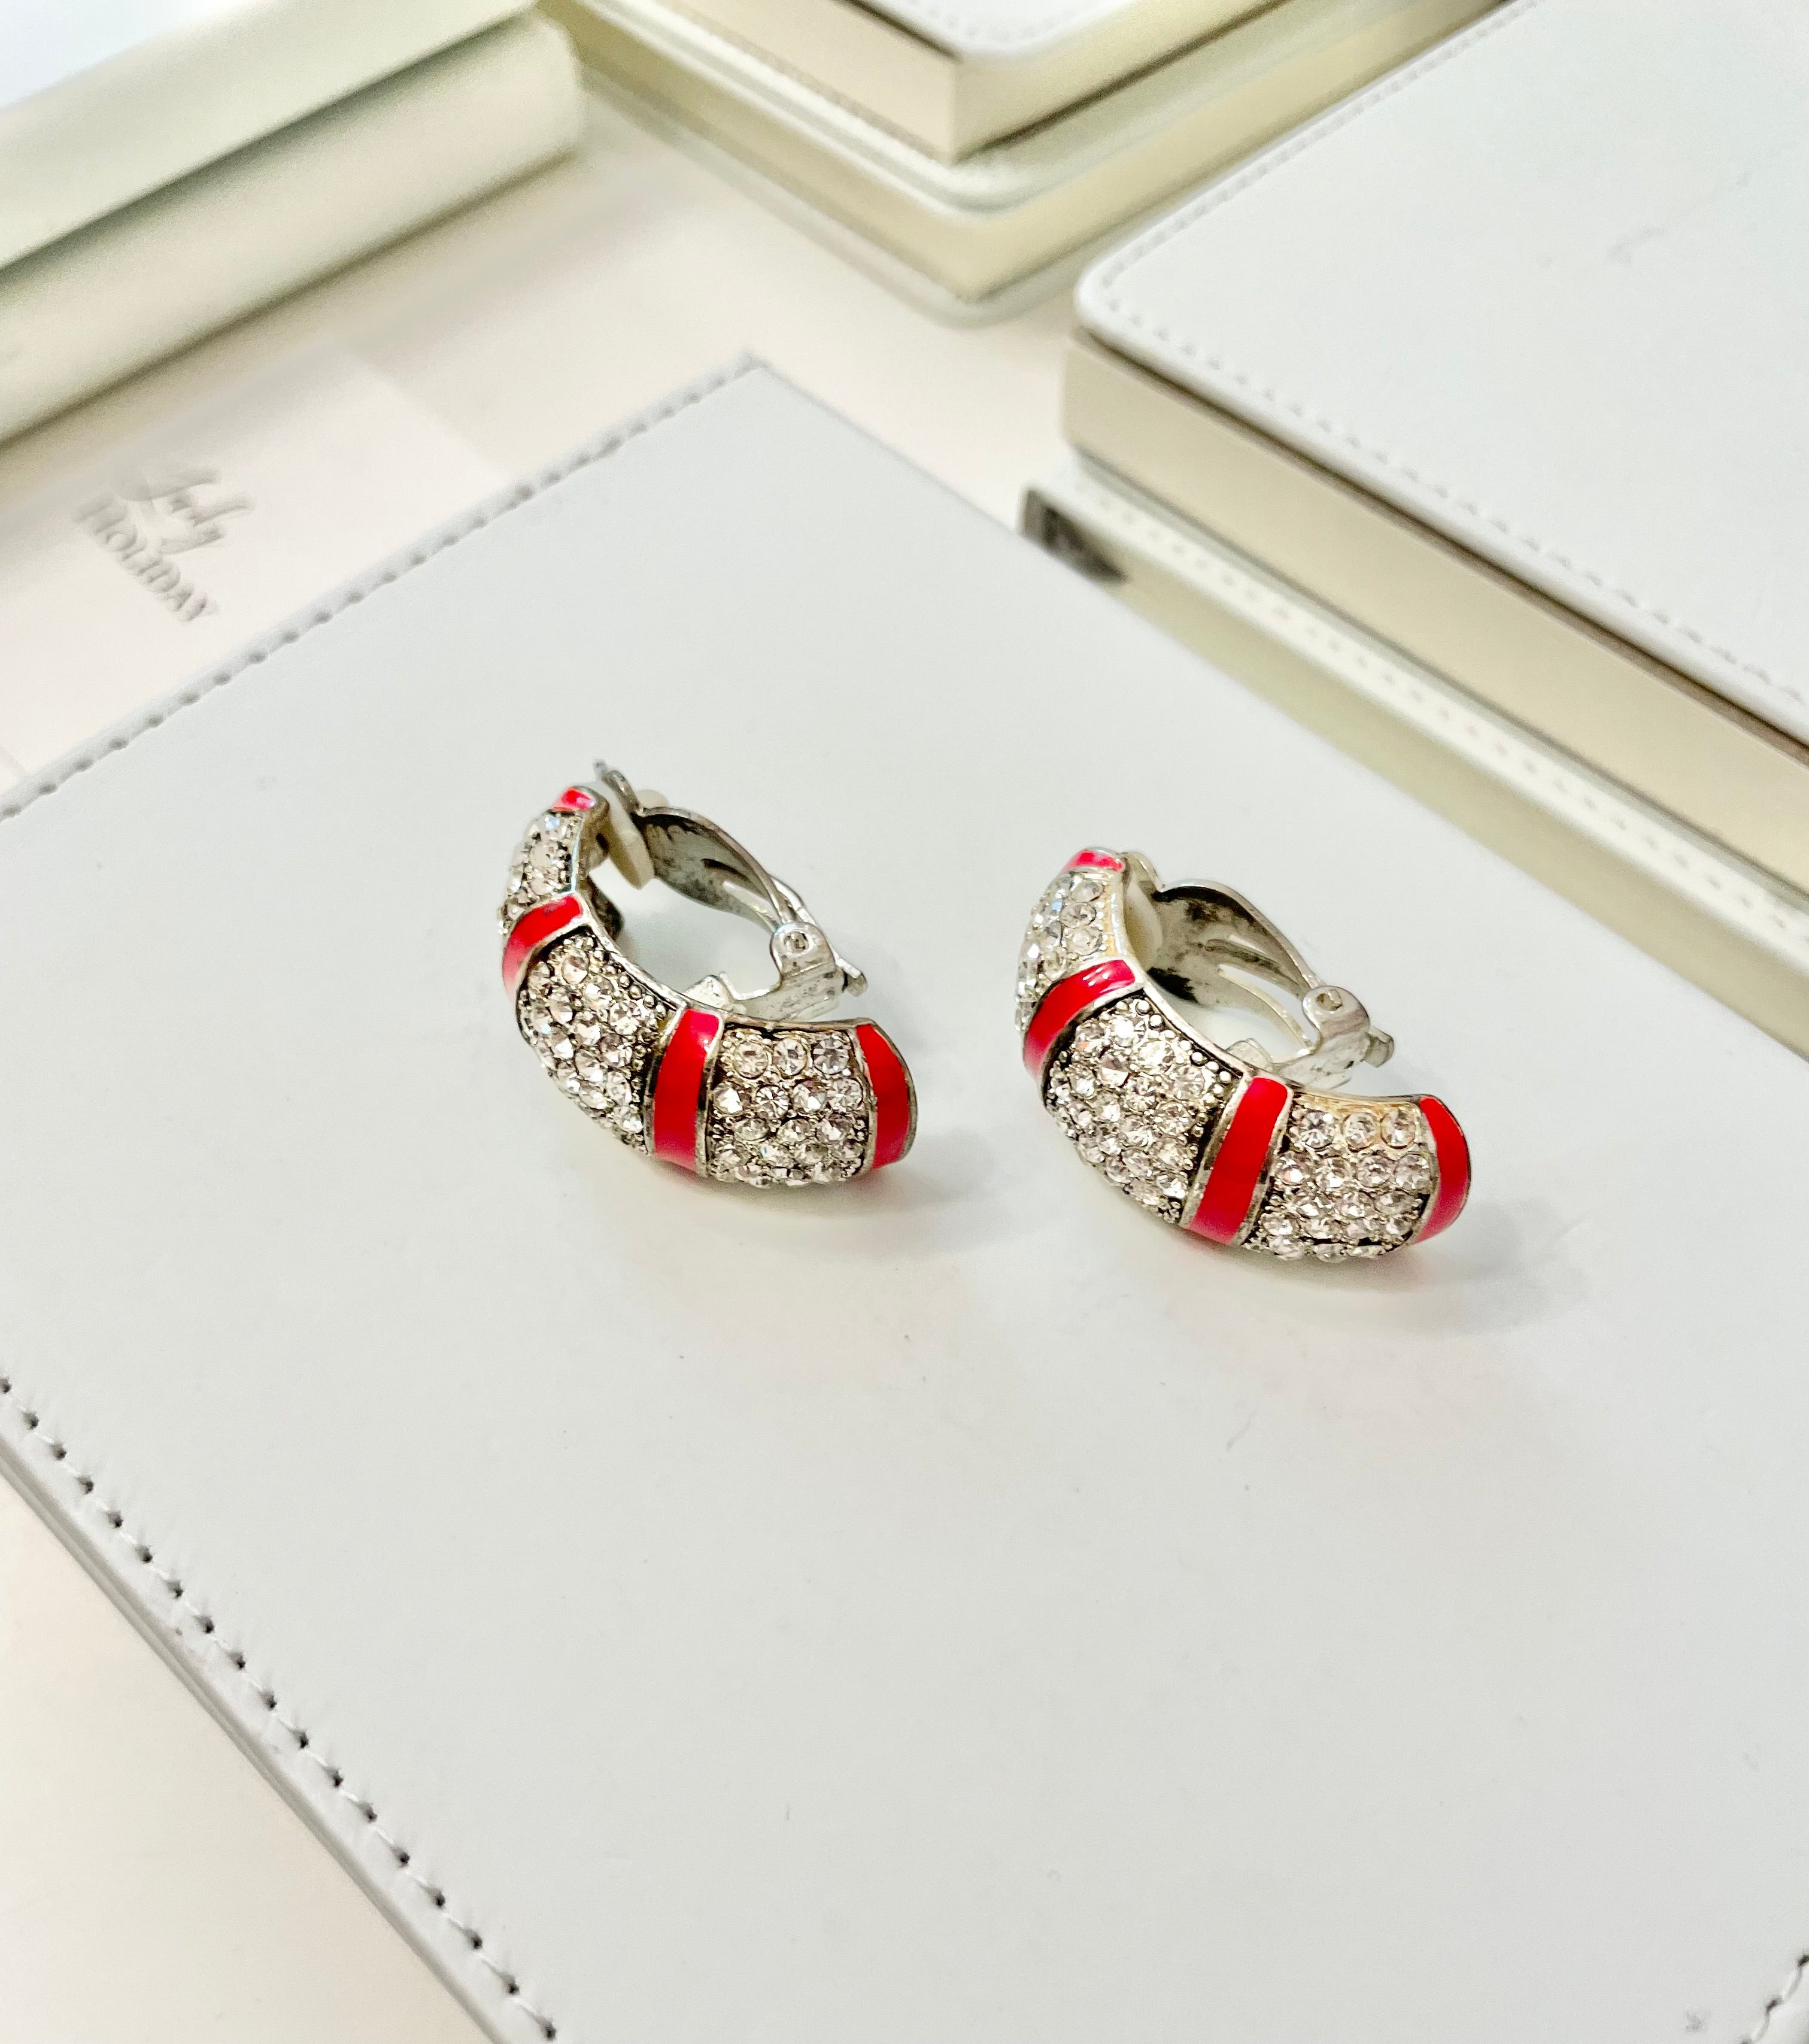 Vintage 1970's pave set stone hoop style clip on earrings, with red enamel details... so classy